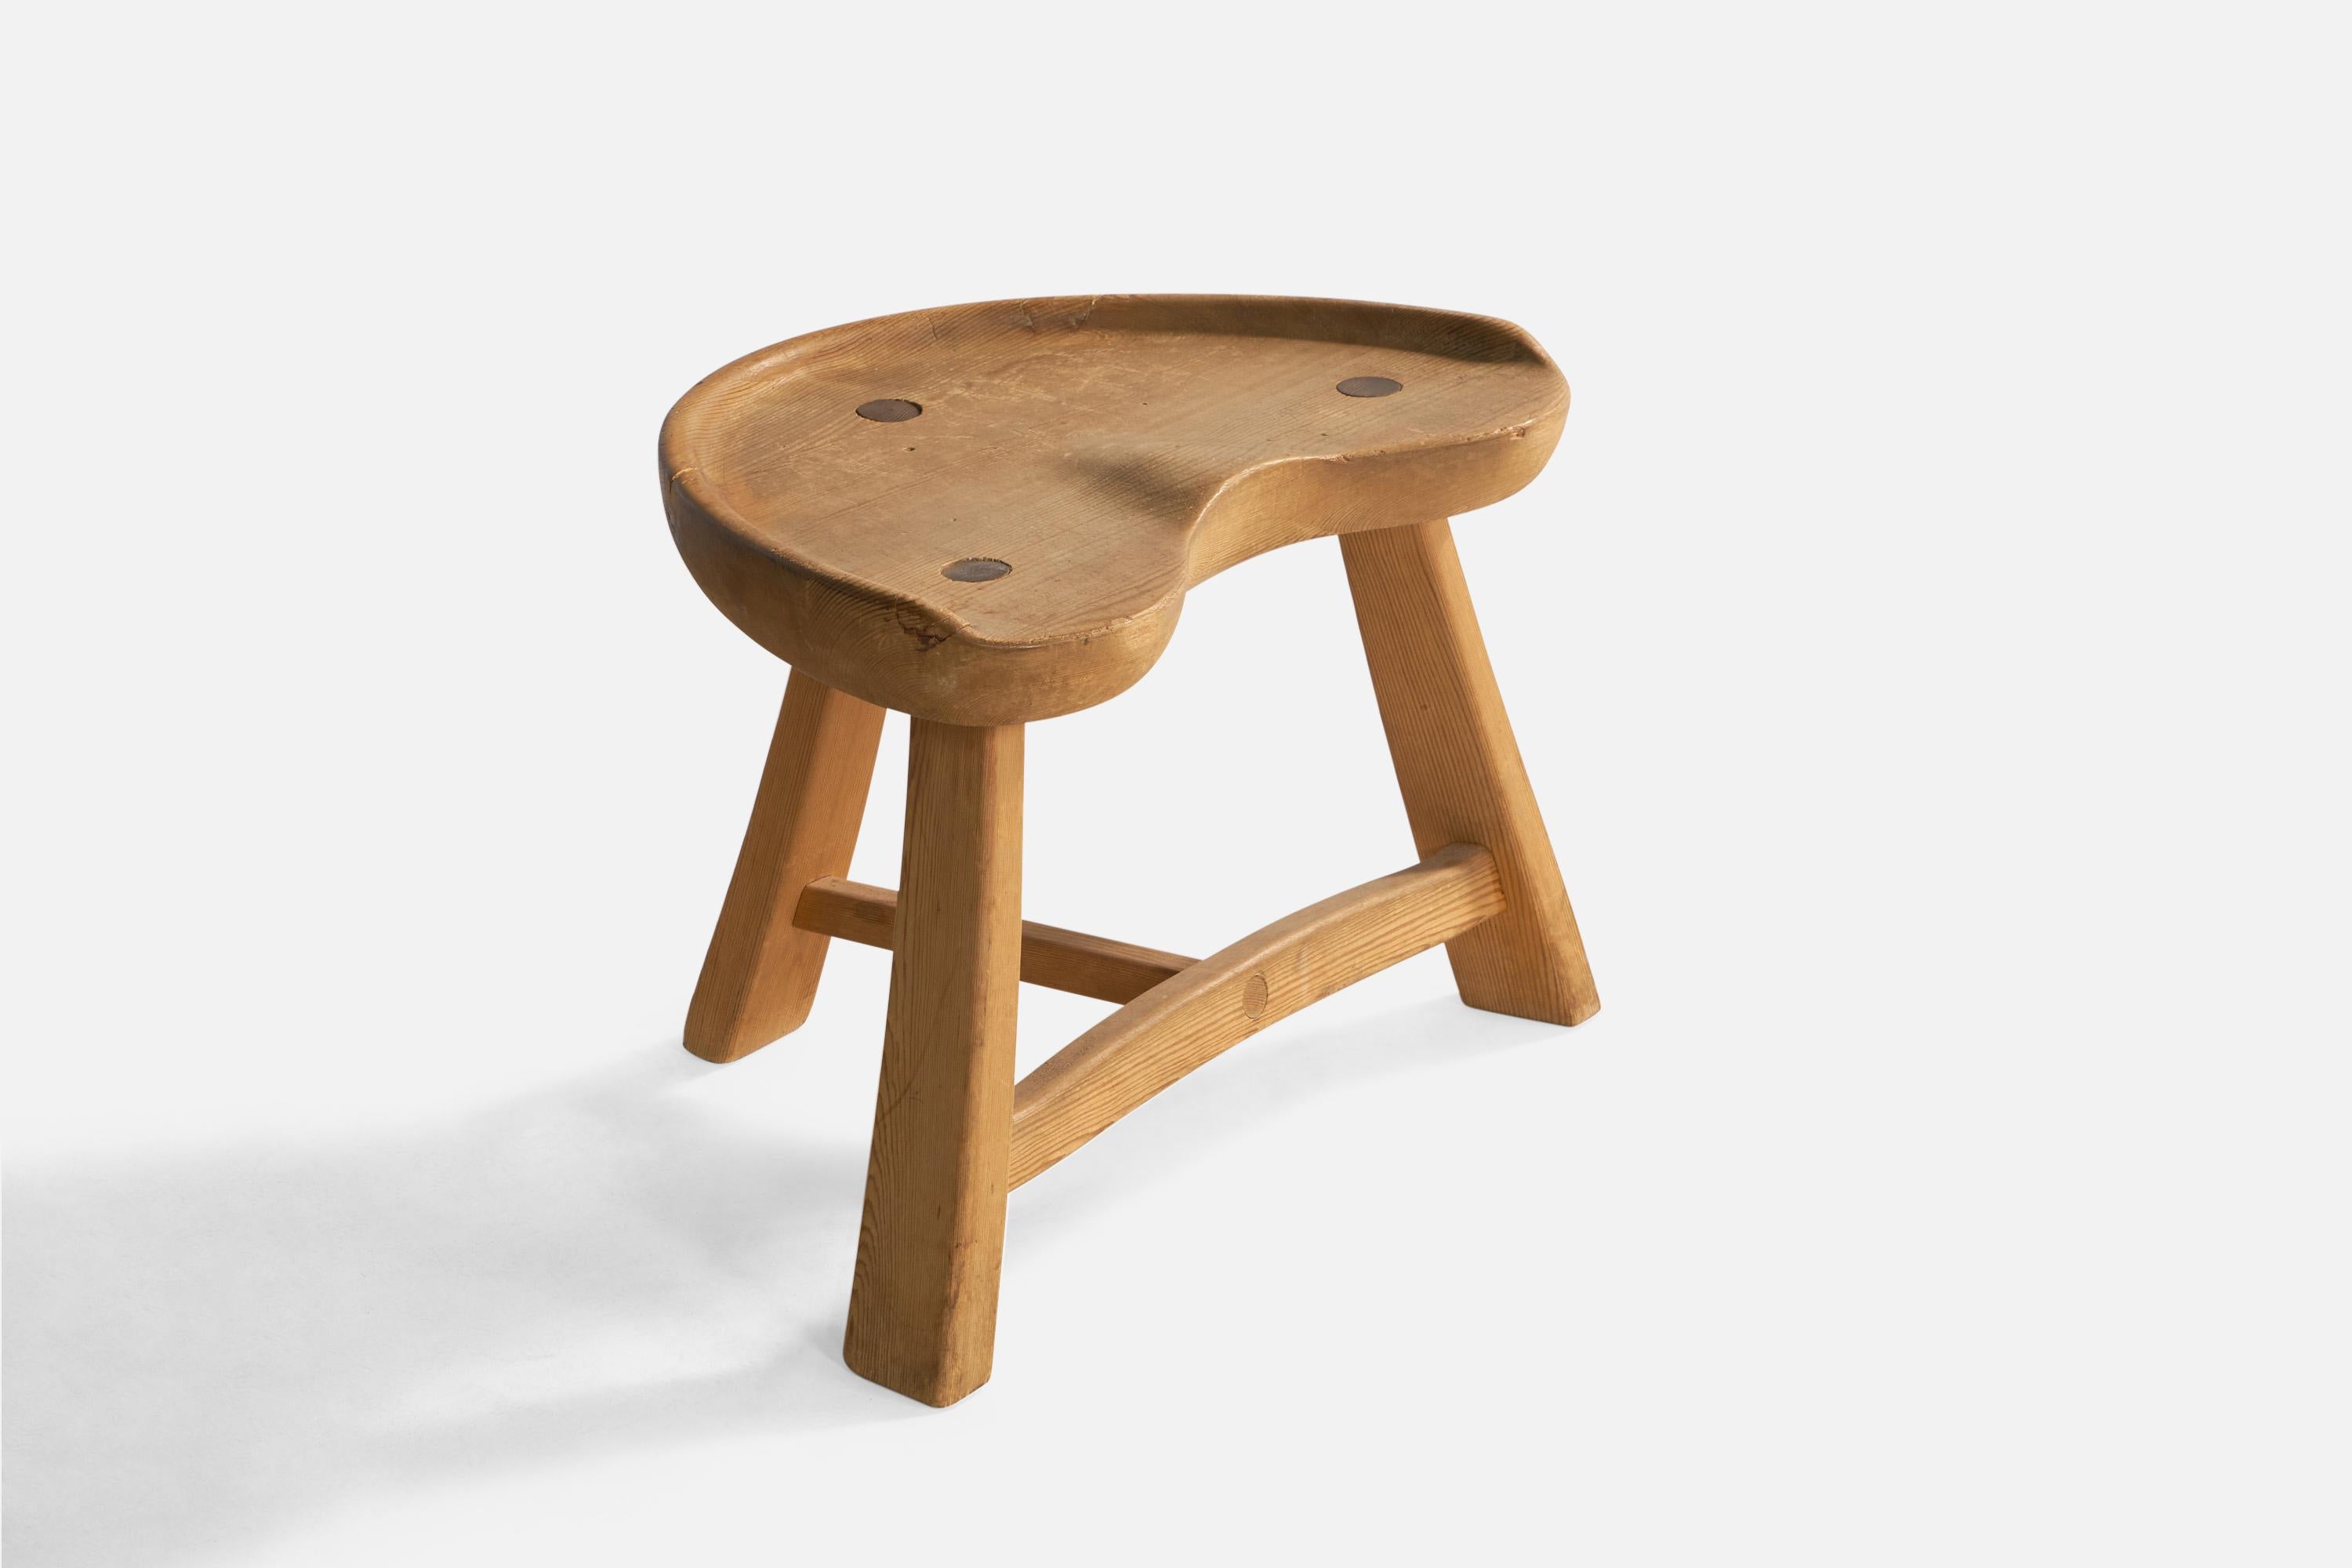 A pine stool designed and produced by Krogenös Møbler, Norway, 1960s.

Seat height: 13.5”